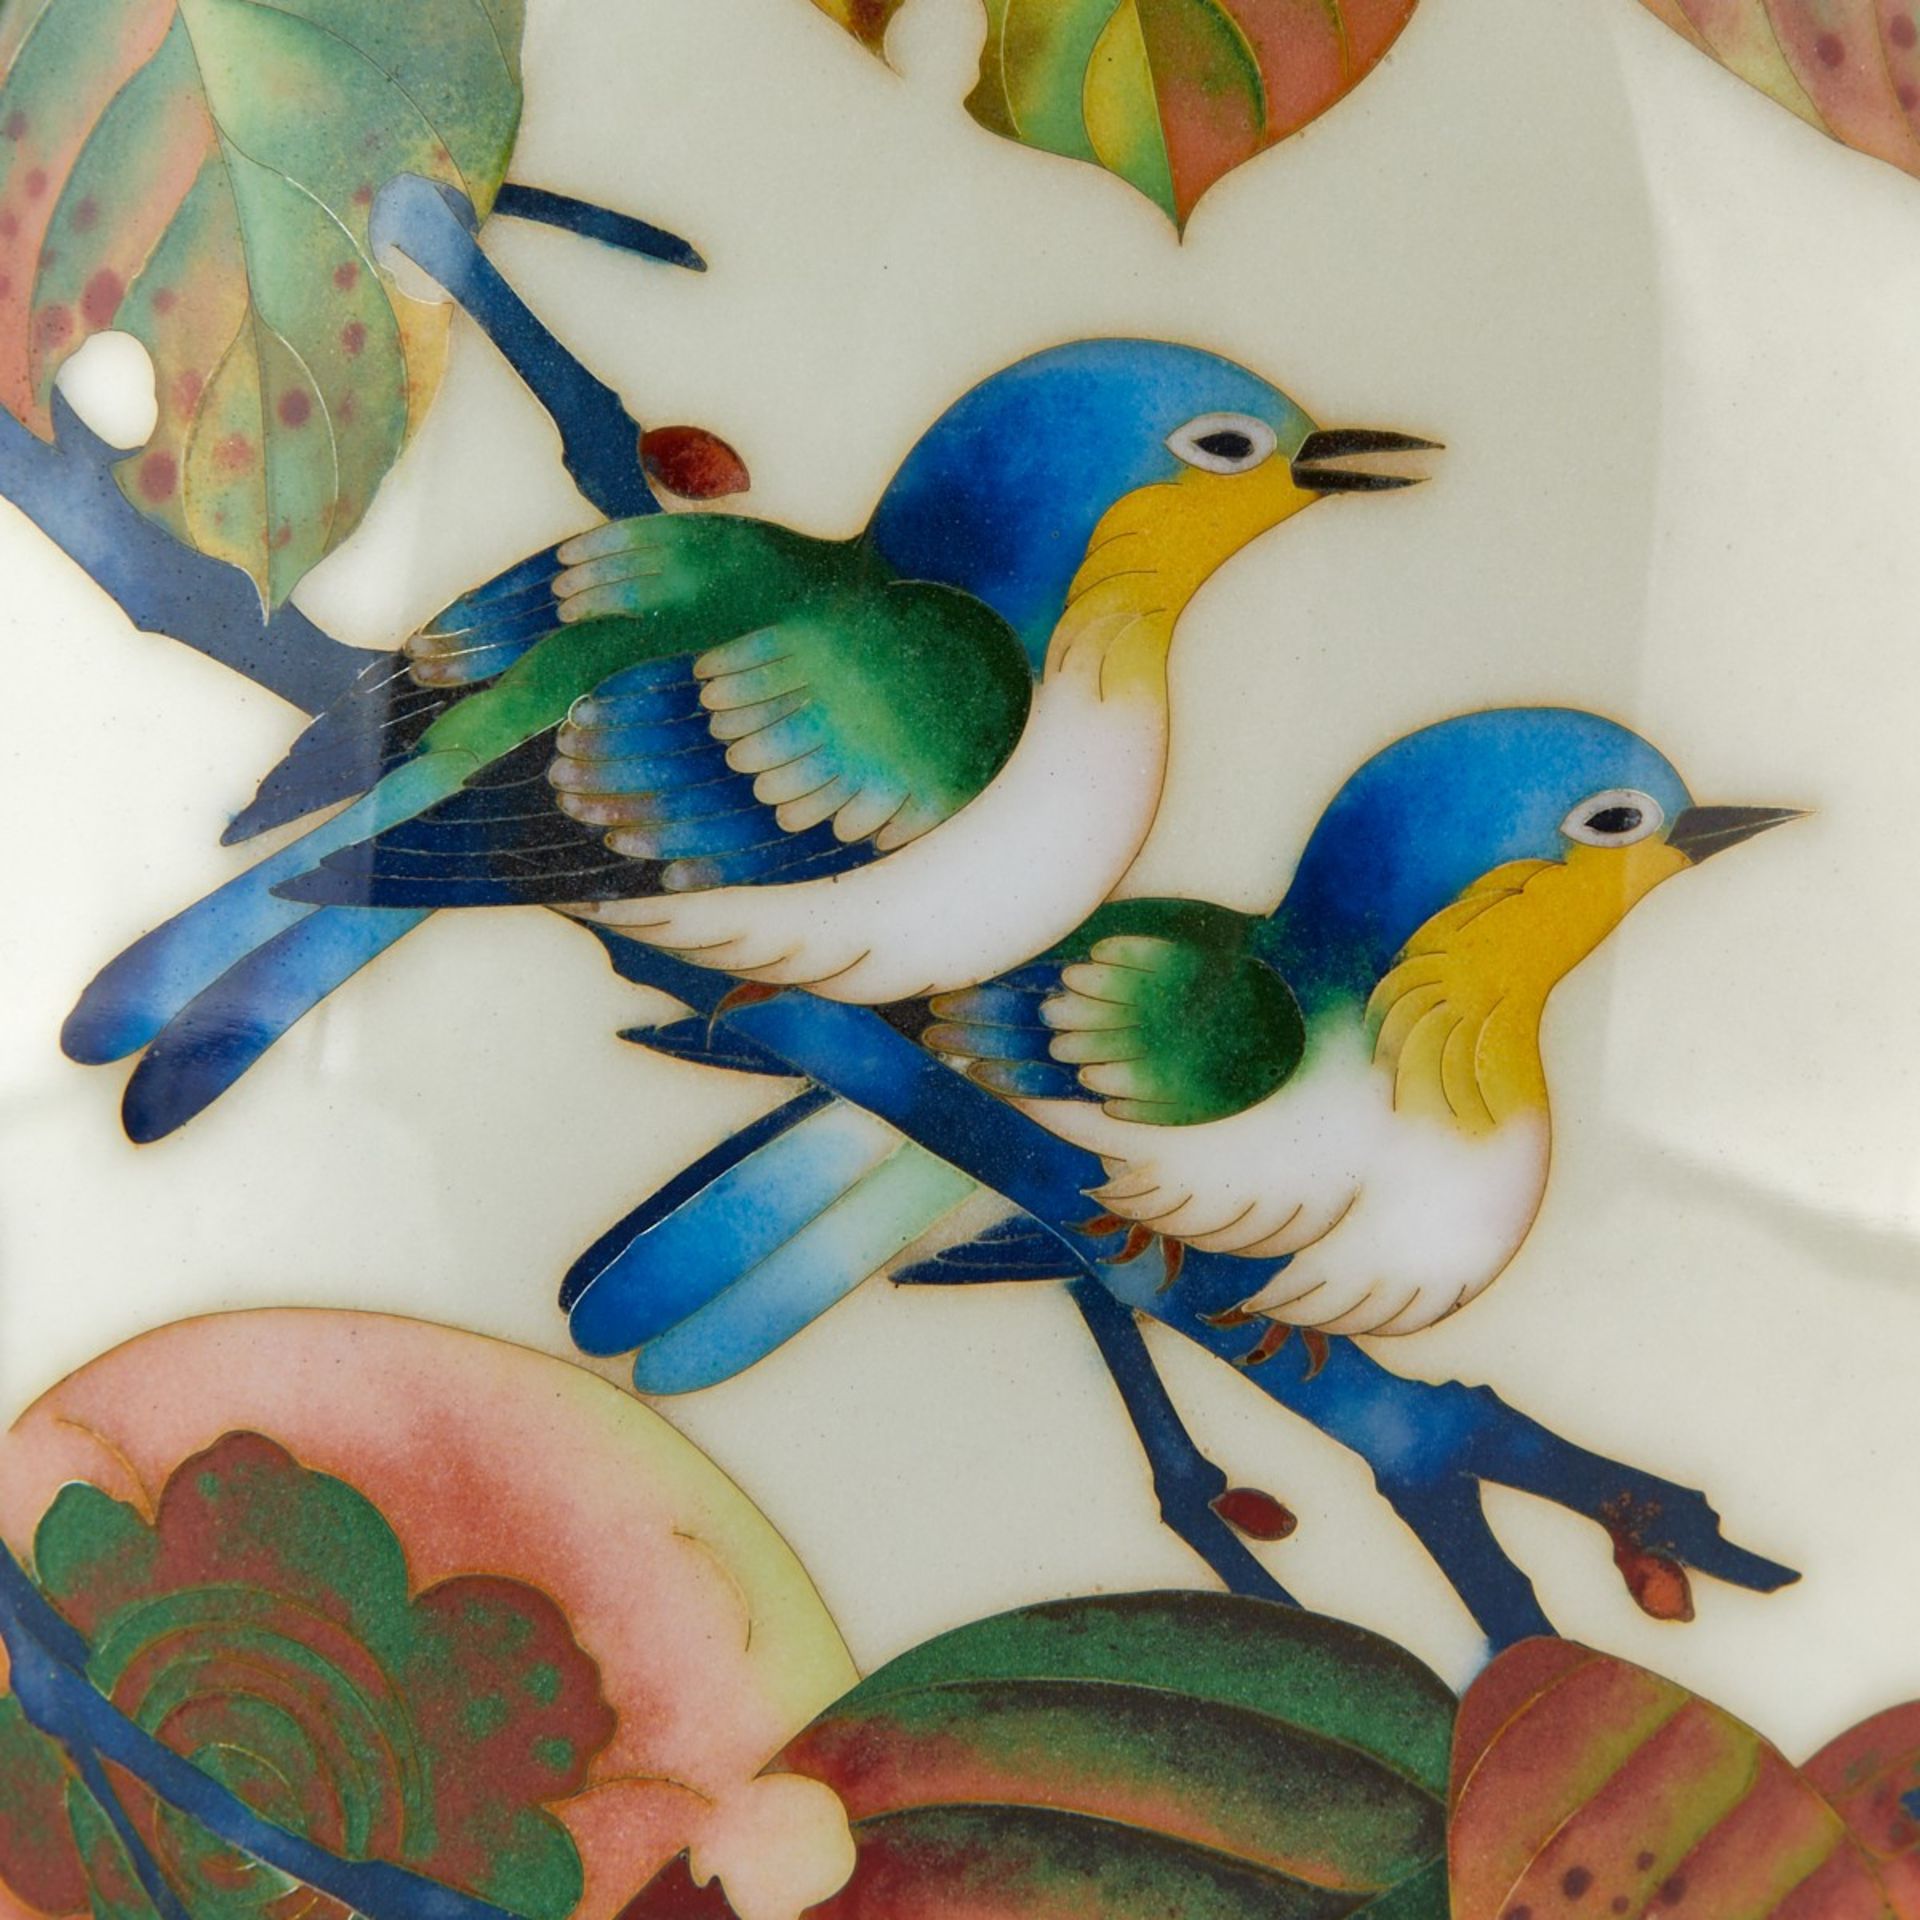 Japanese Cloisonne Vase w/ Persimmons and Birds - Image 4 of 7